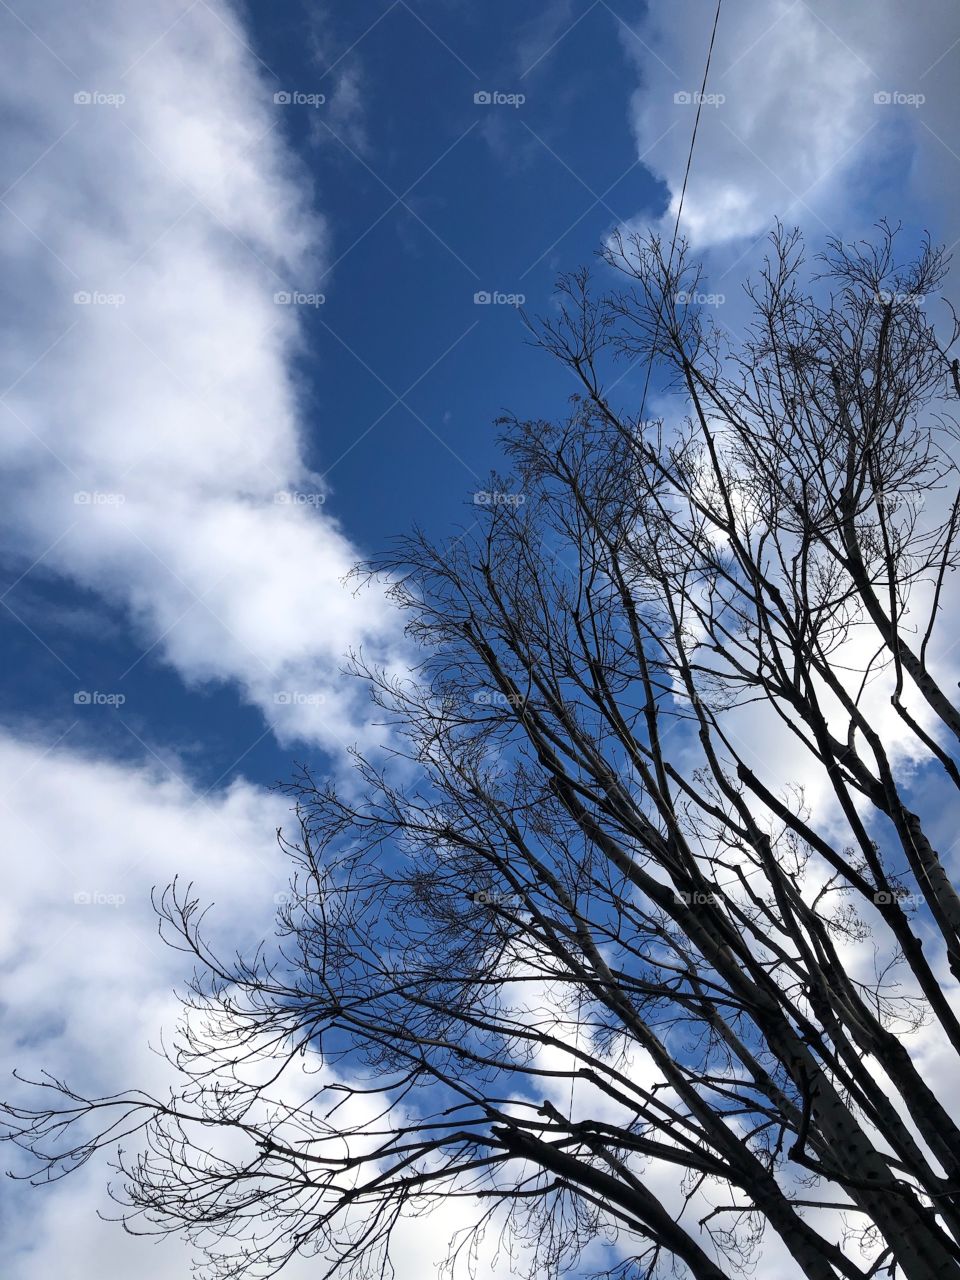 A Line In the Tree (Sky’s View)